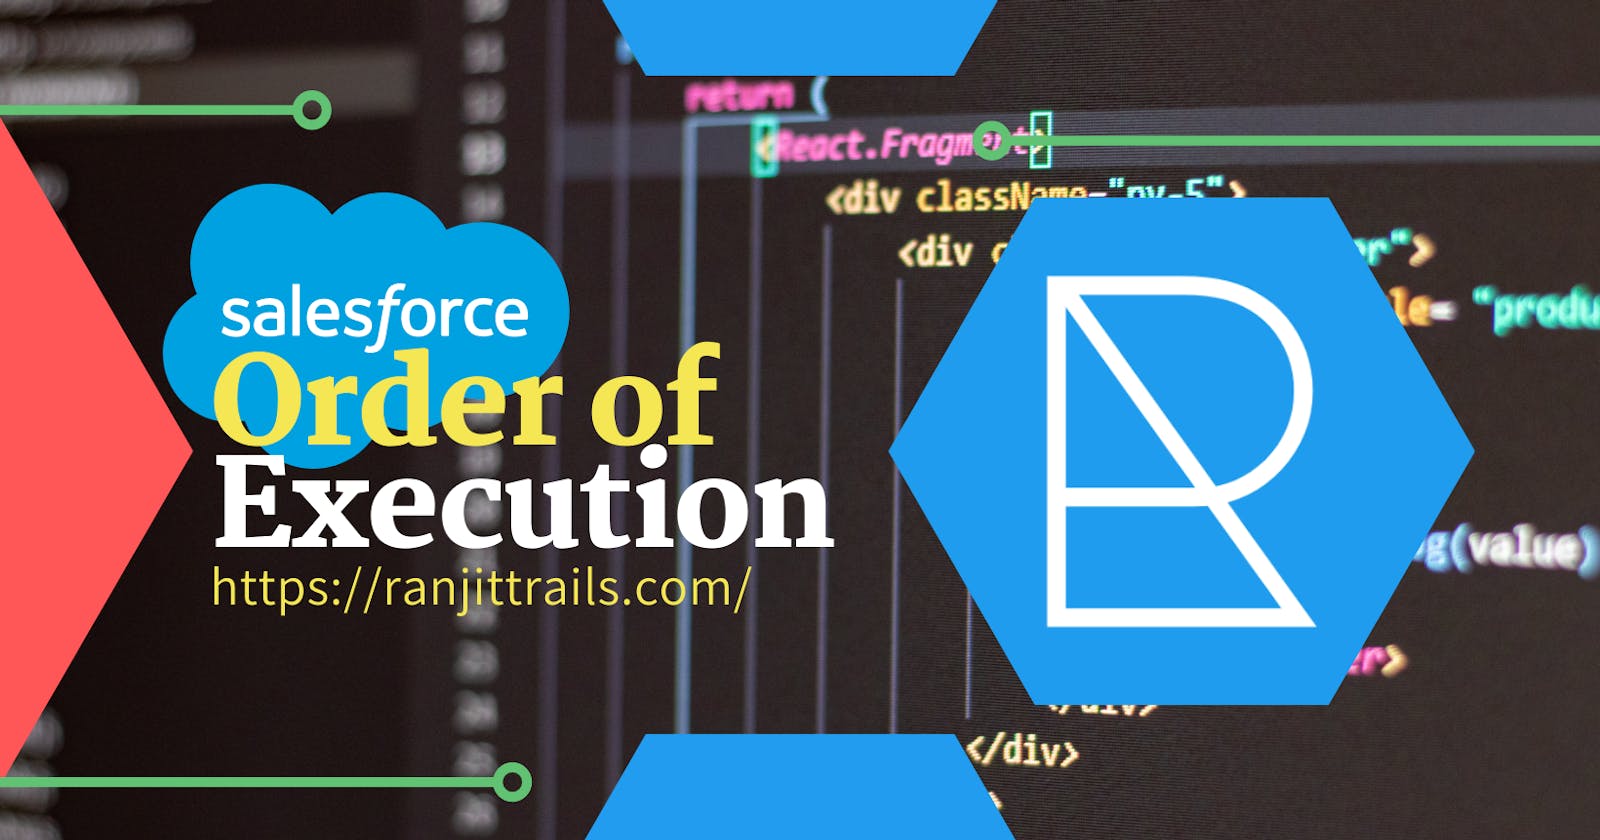 Salesforce : Order of Execution